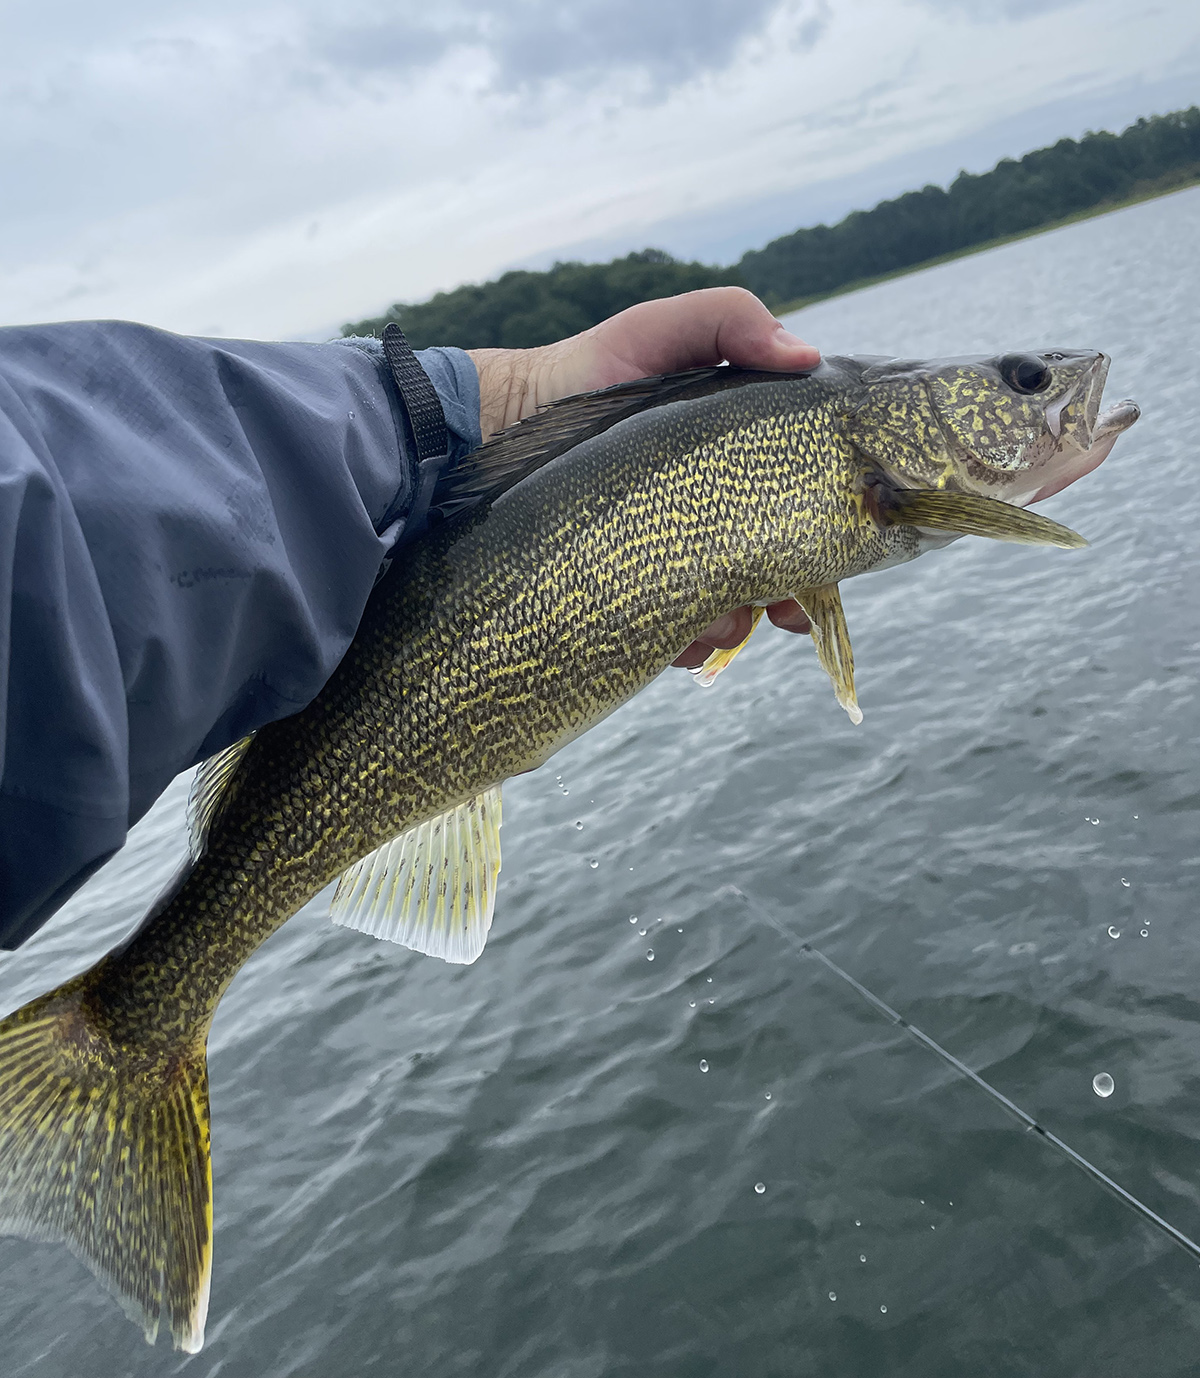 An image of a Virginia Walleye above a water source. this fish is an olive green with a dark green back and spots along it's body.